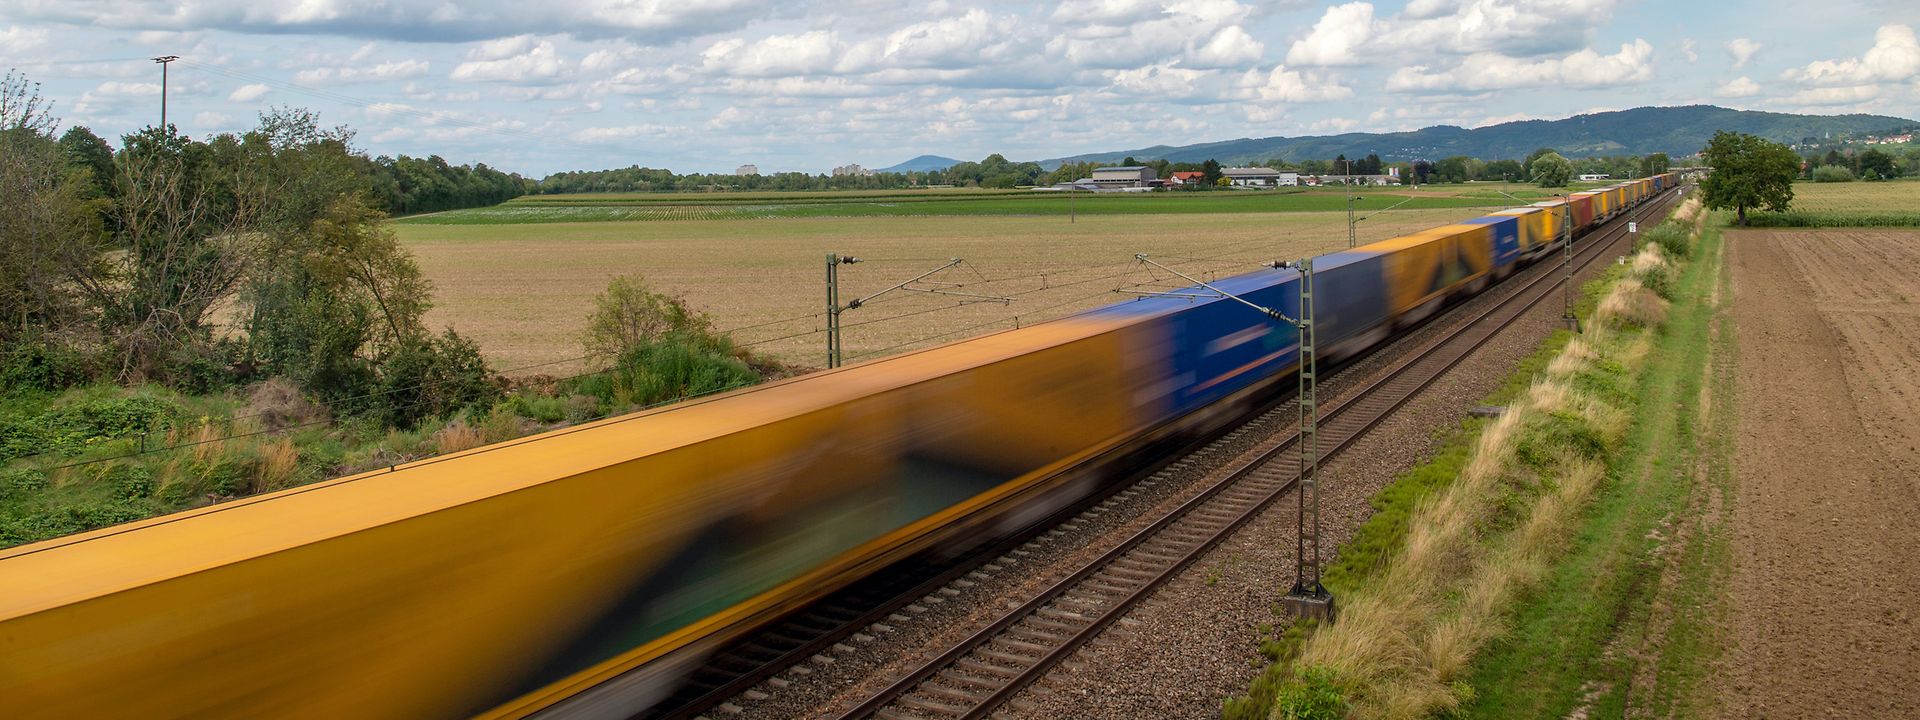 A yellow train travels through the countryside